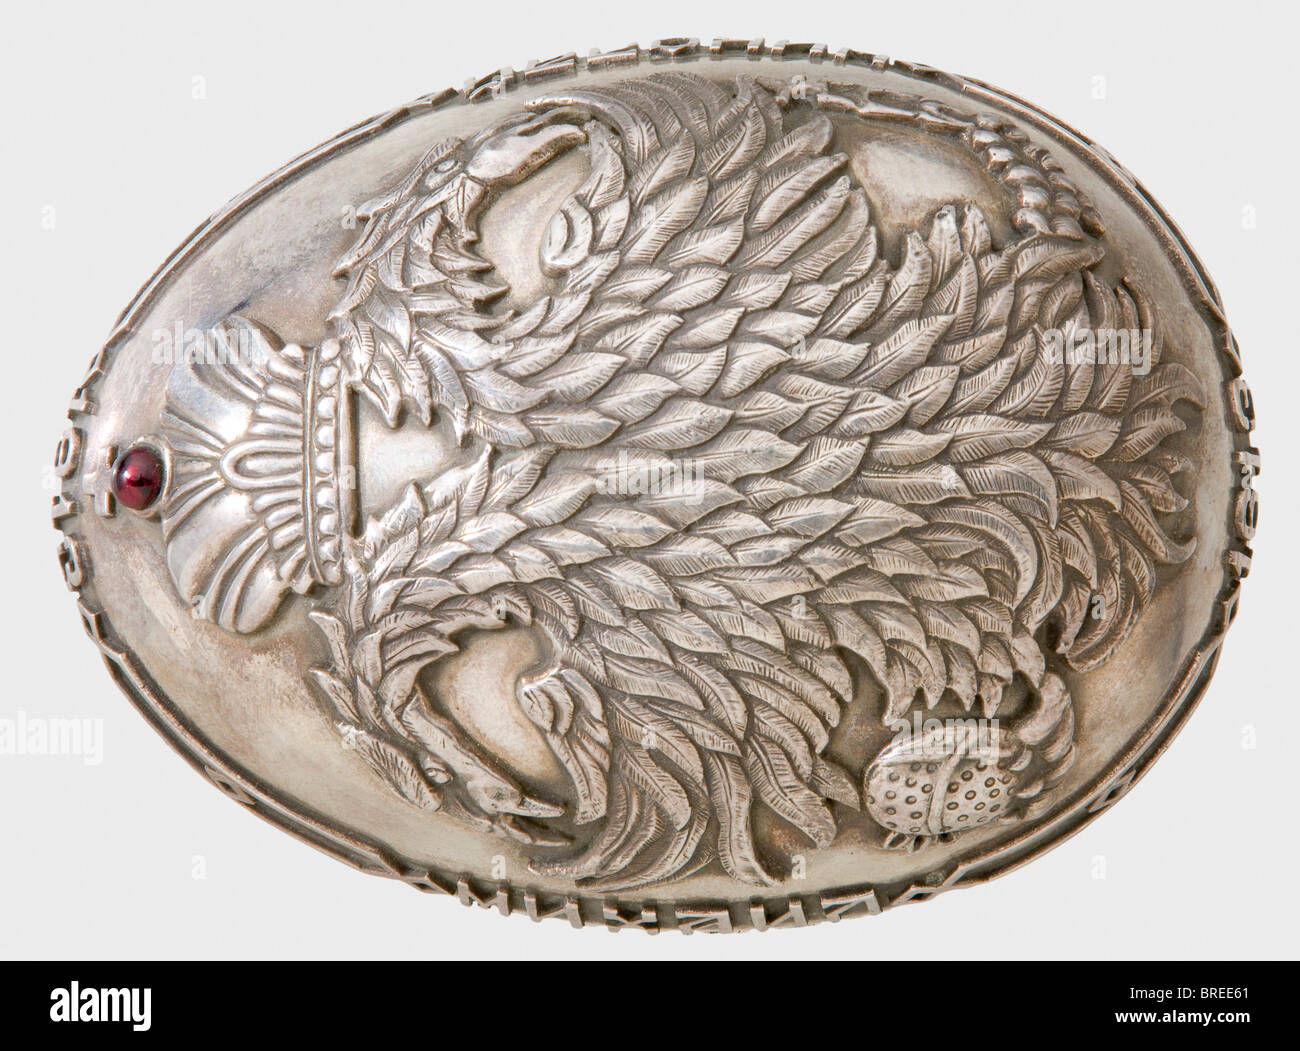 A silver egg, gift from the House of Romanov, on the occasion of their 300th anniversary, 1913 Purveyor to the Court, Pavel Ovchinnikov, Moscow, 1913. Silver, gilt interior, made in two pieces. Raised double-headed eagle beneath the tsarist crown adorned with a red almandine. Surrounding inscriptions 'Mihail 1613 - Nikolai 1913' and '300 Years'. Cyrillic master's mark, 'Ovchinnikov' with the double-headed eagle, and Moscow hallmark for '84' zolotniki. Oval silver stand with three pine feet. Dimensions ca 12.5 x 9 cm. Total height 10 cm. Total weight 593 g. hist, Stock Photo